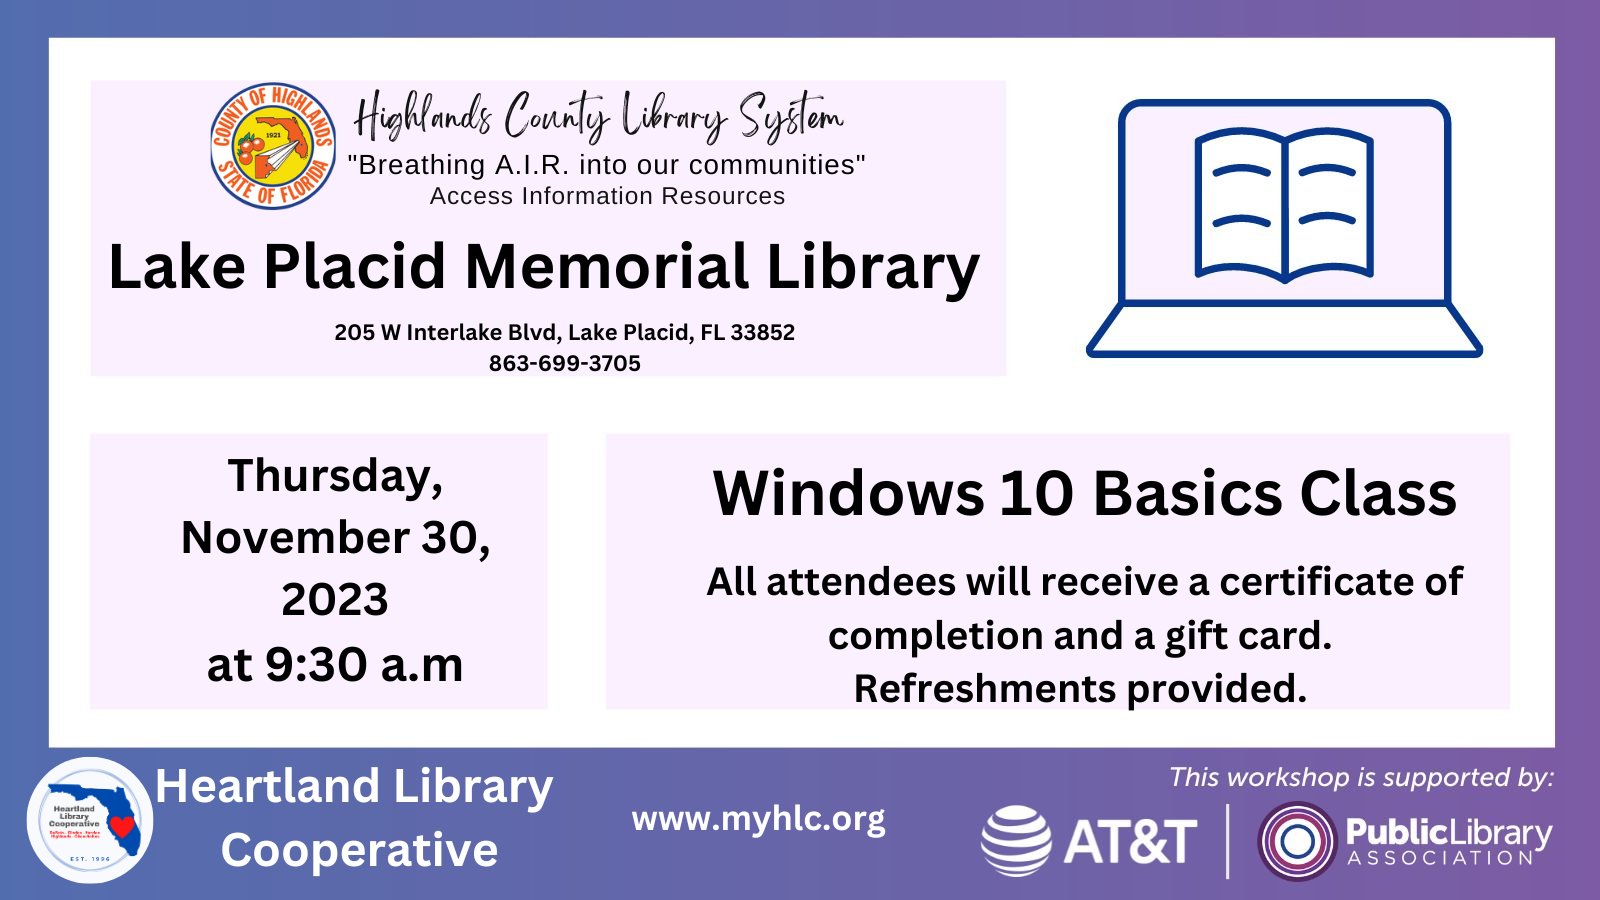 On Thursday, November 30, 2023 at 9:30 a.m., the Lake Placid Memorial Library will host a Windows 10 basics course.